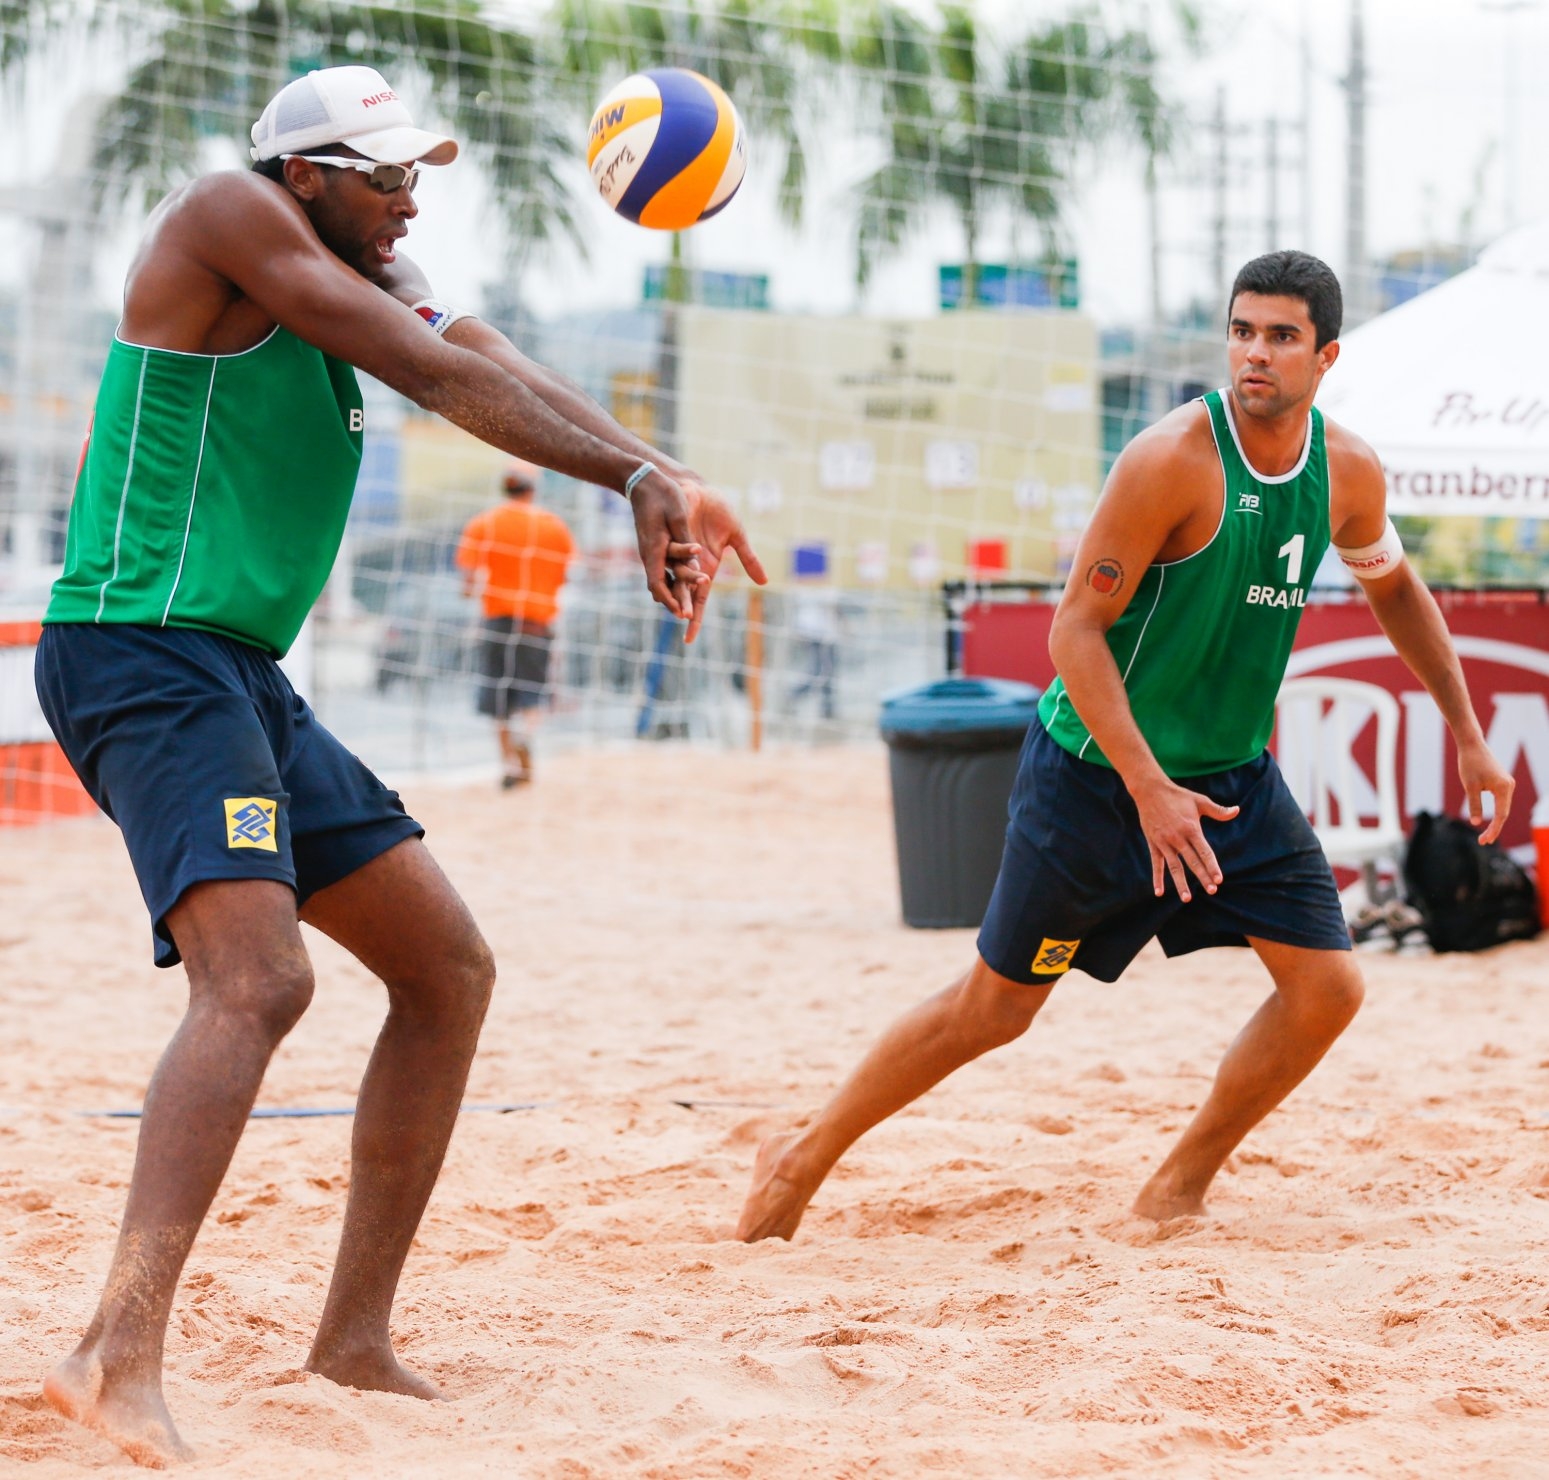 Evandro and Vitor have played in 20 World Tour events together between 2013 and 2014 (Photocredit: FIVB)